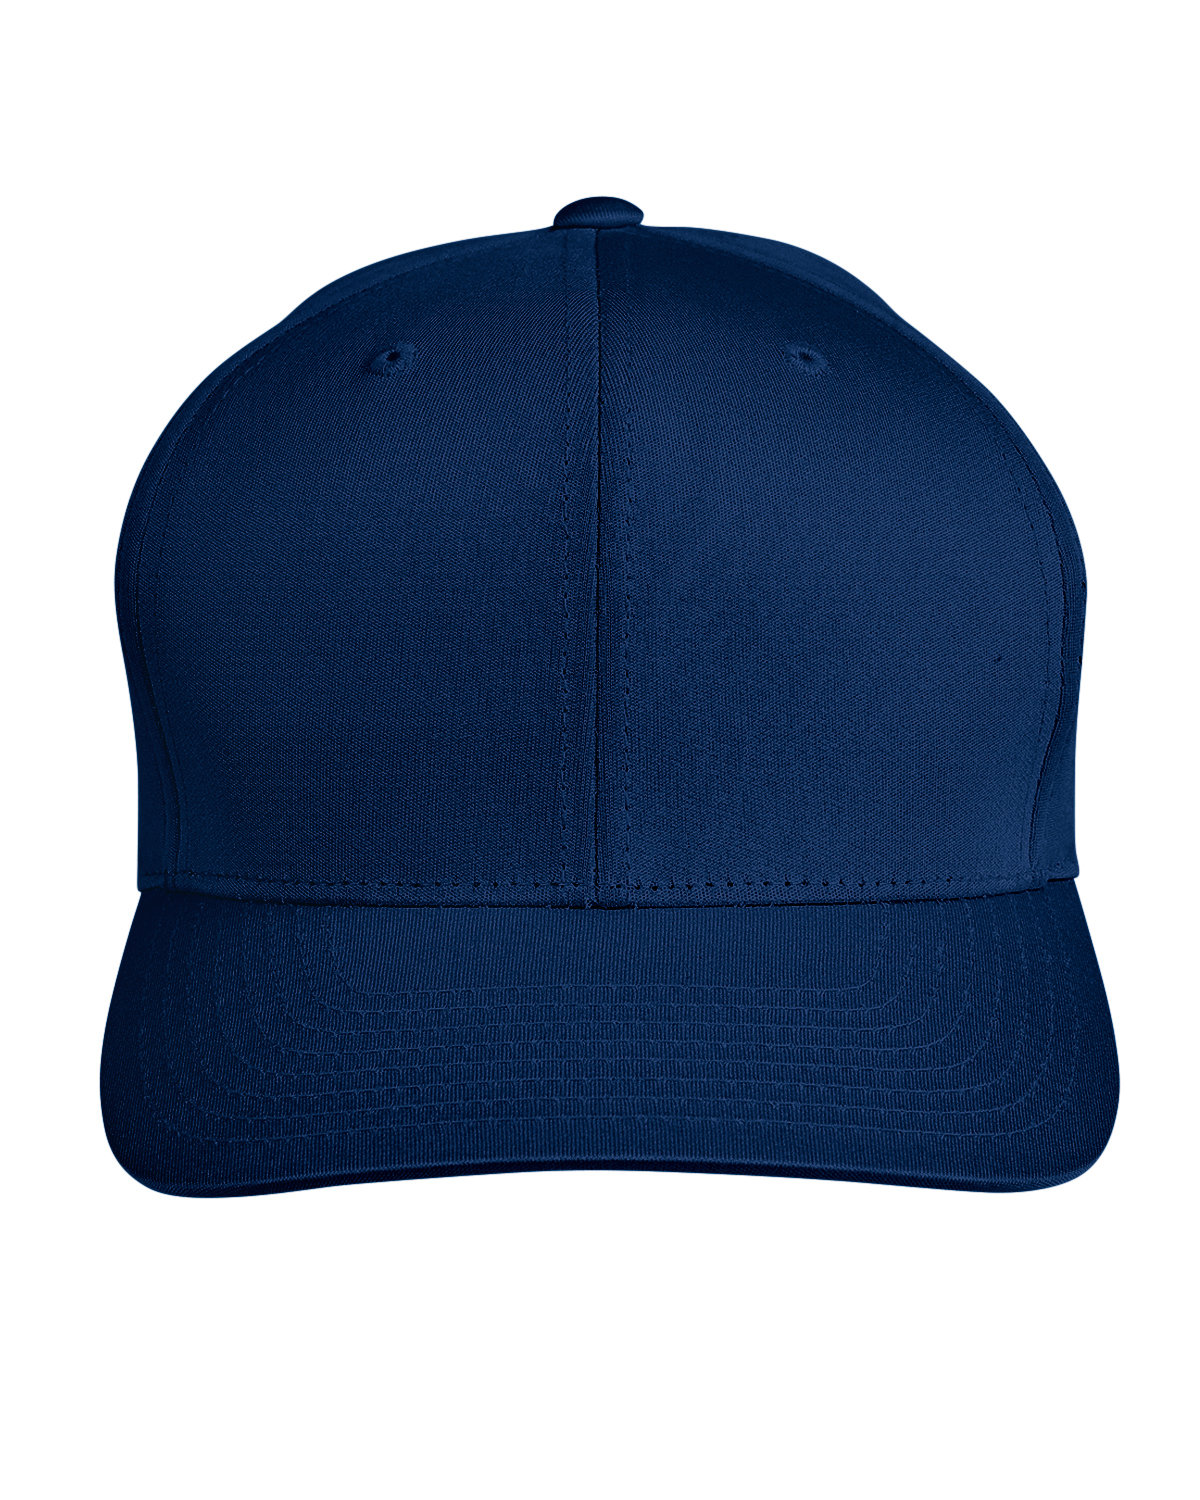 Team 365 by Yupoong® Adult Zone Performance Cap SPORT DARK NAVY 